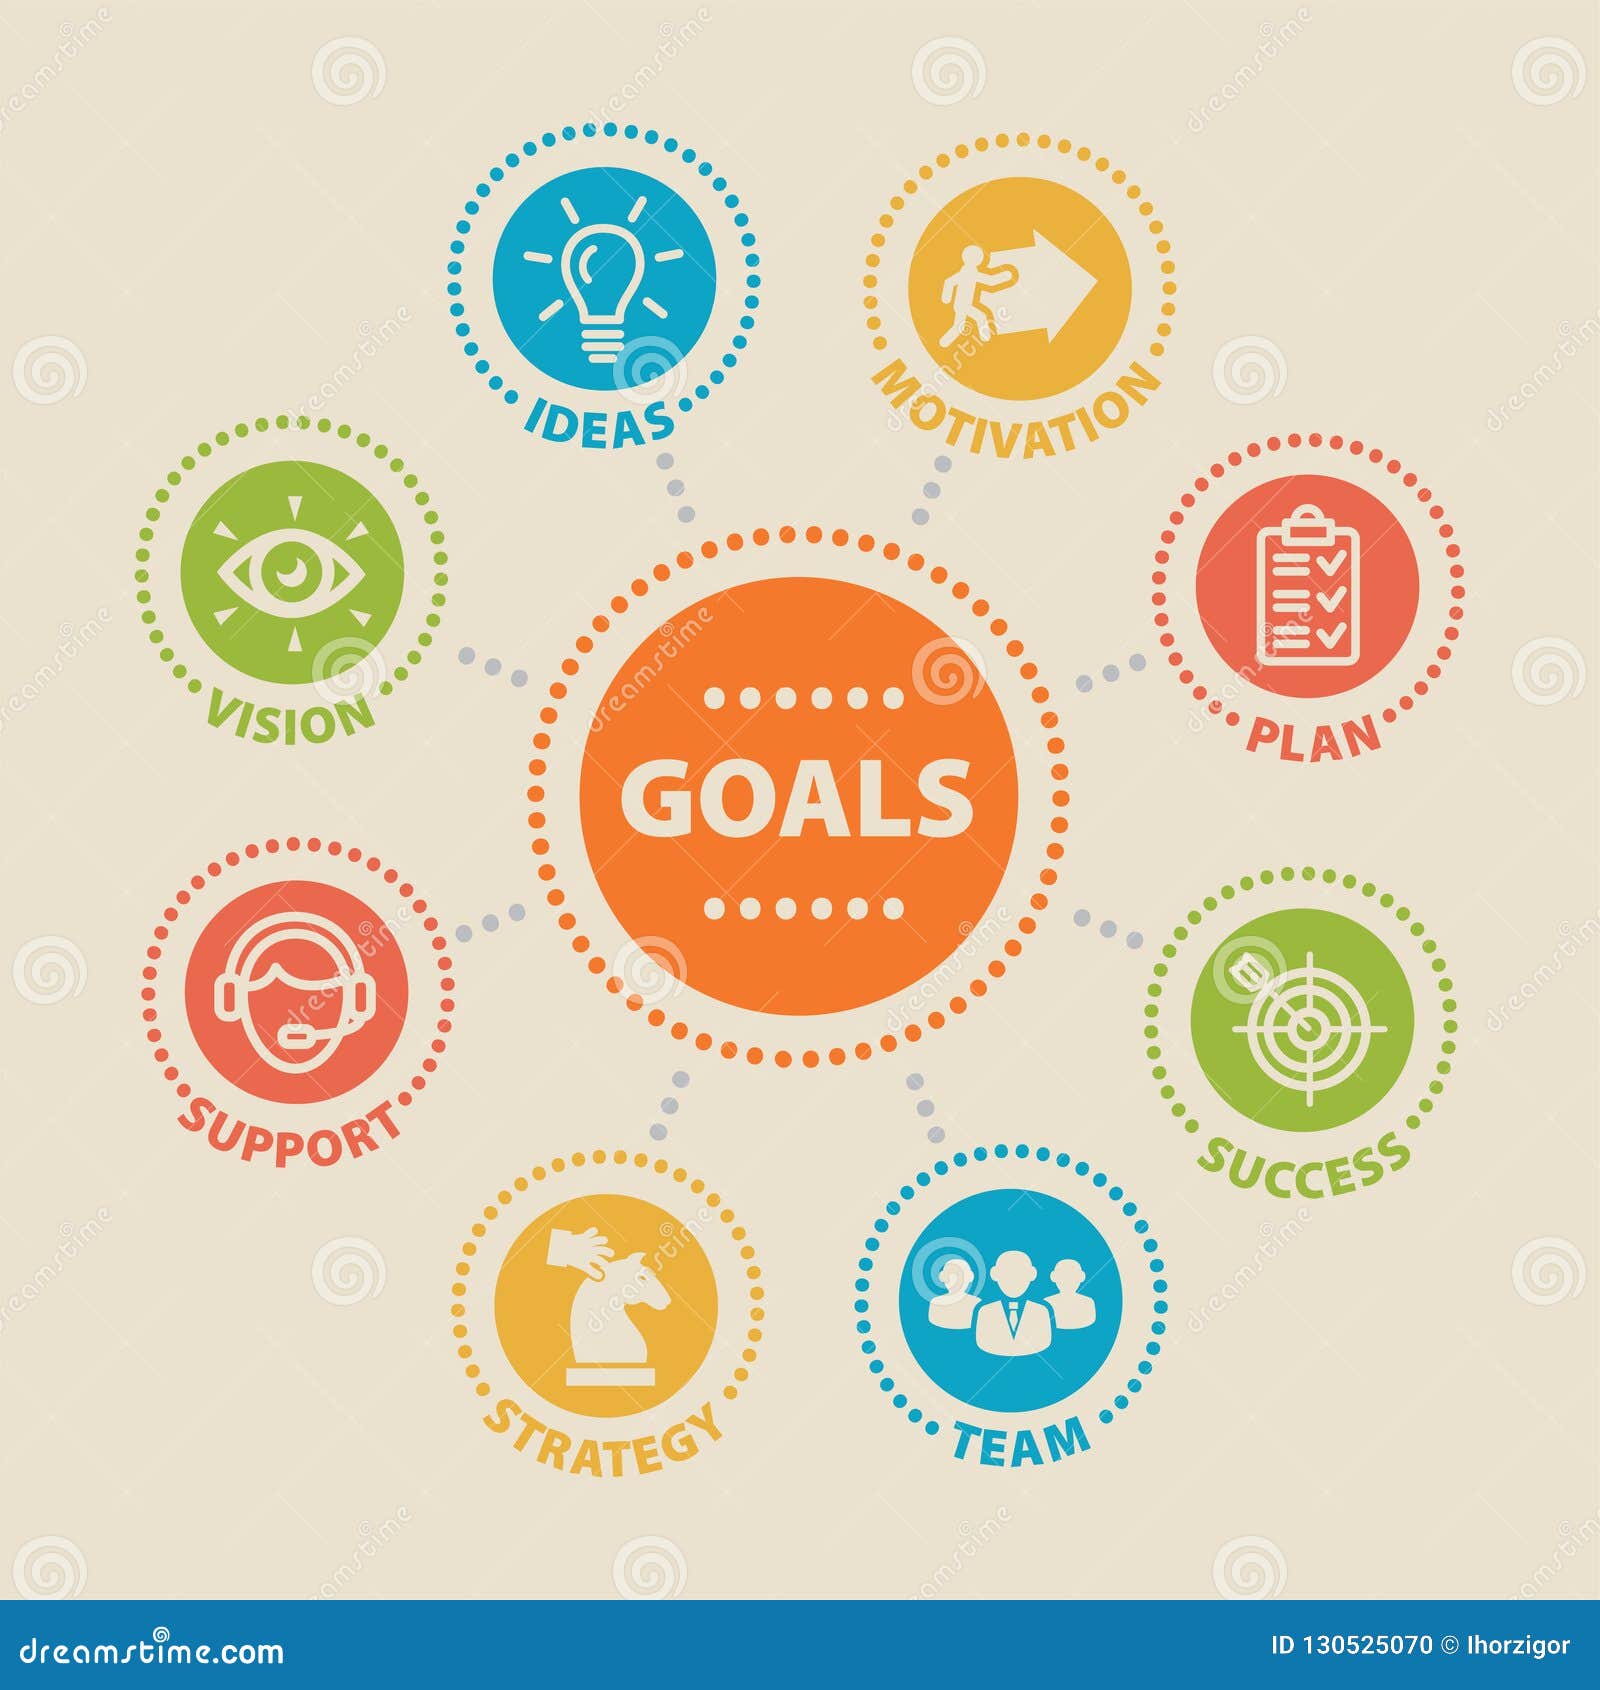 GOALS Concept with icons stock vector. Illustration of measurable ...